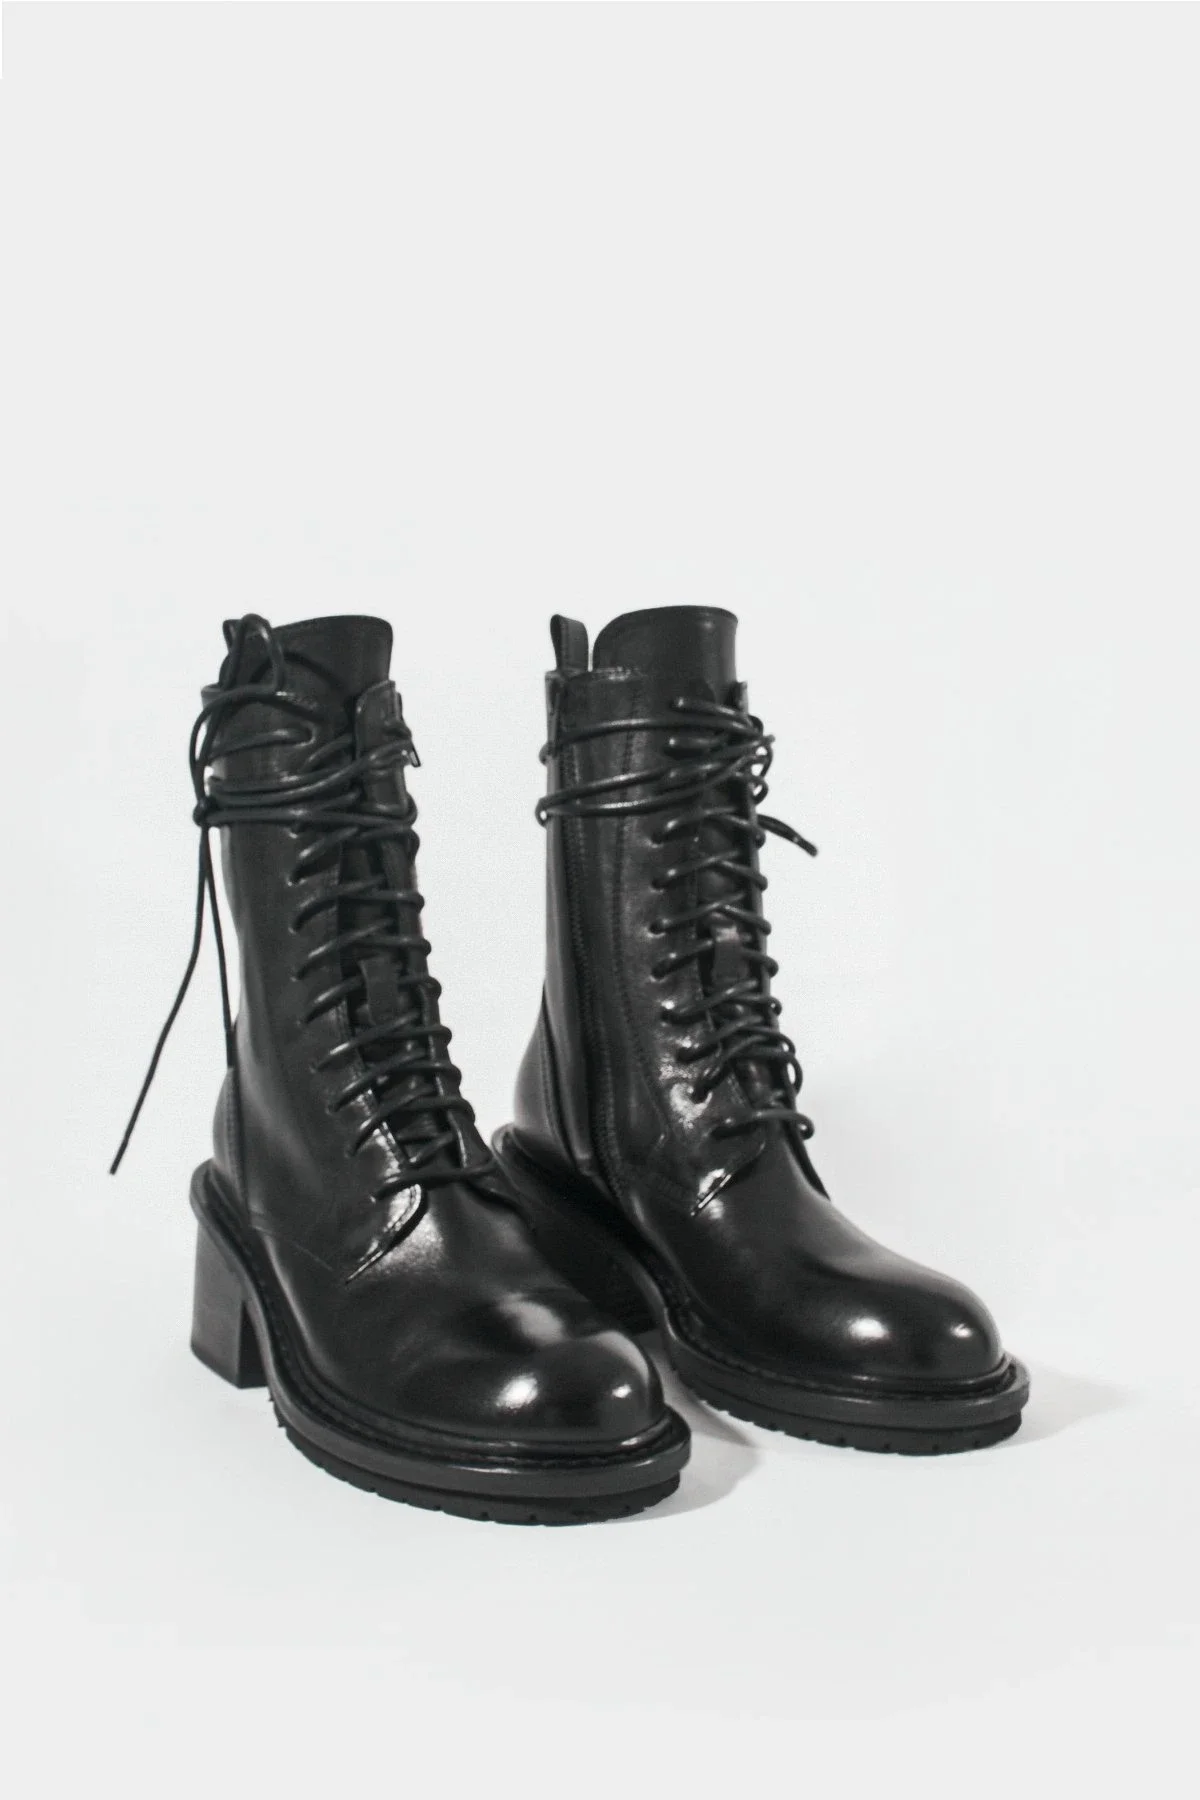 

Black Genuine Leather Combat Boots Women Laces Round Toe Side Zip Closure 7cm Heel Shoes Italy Fashion